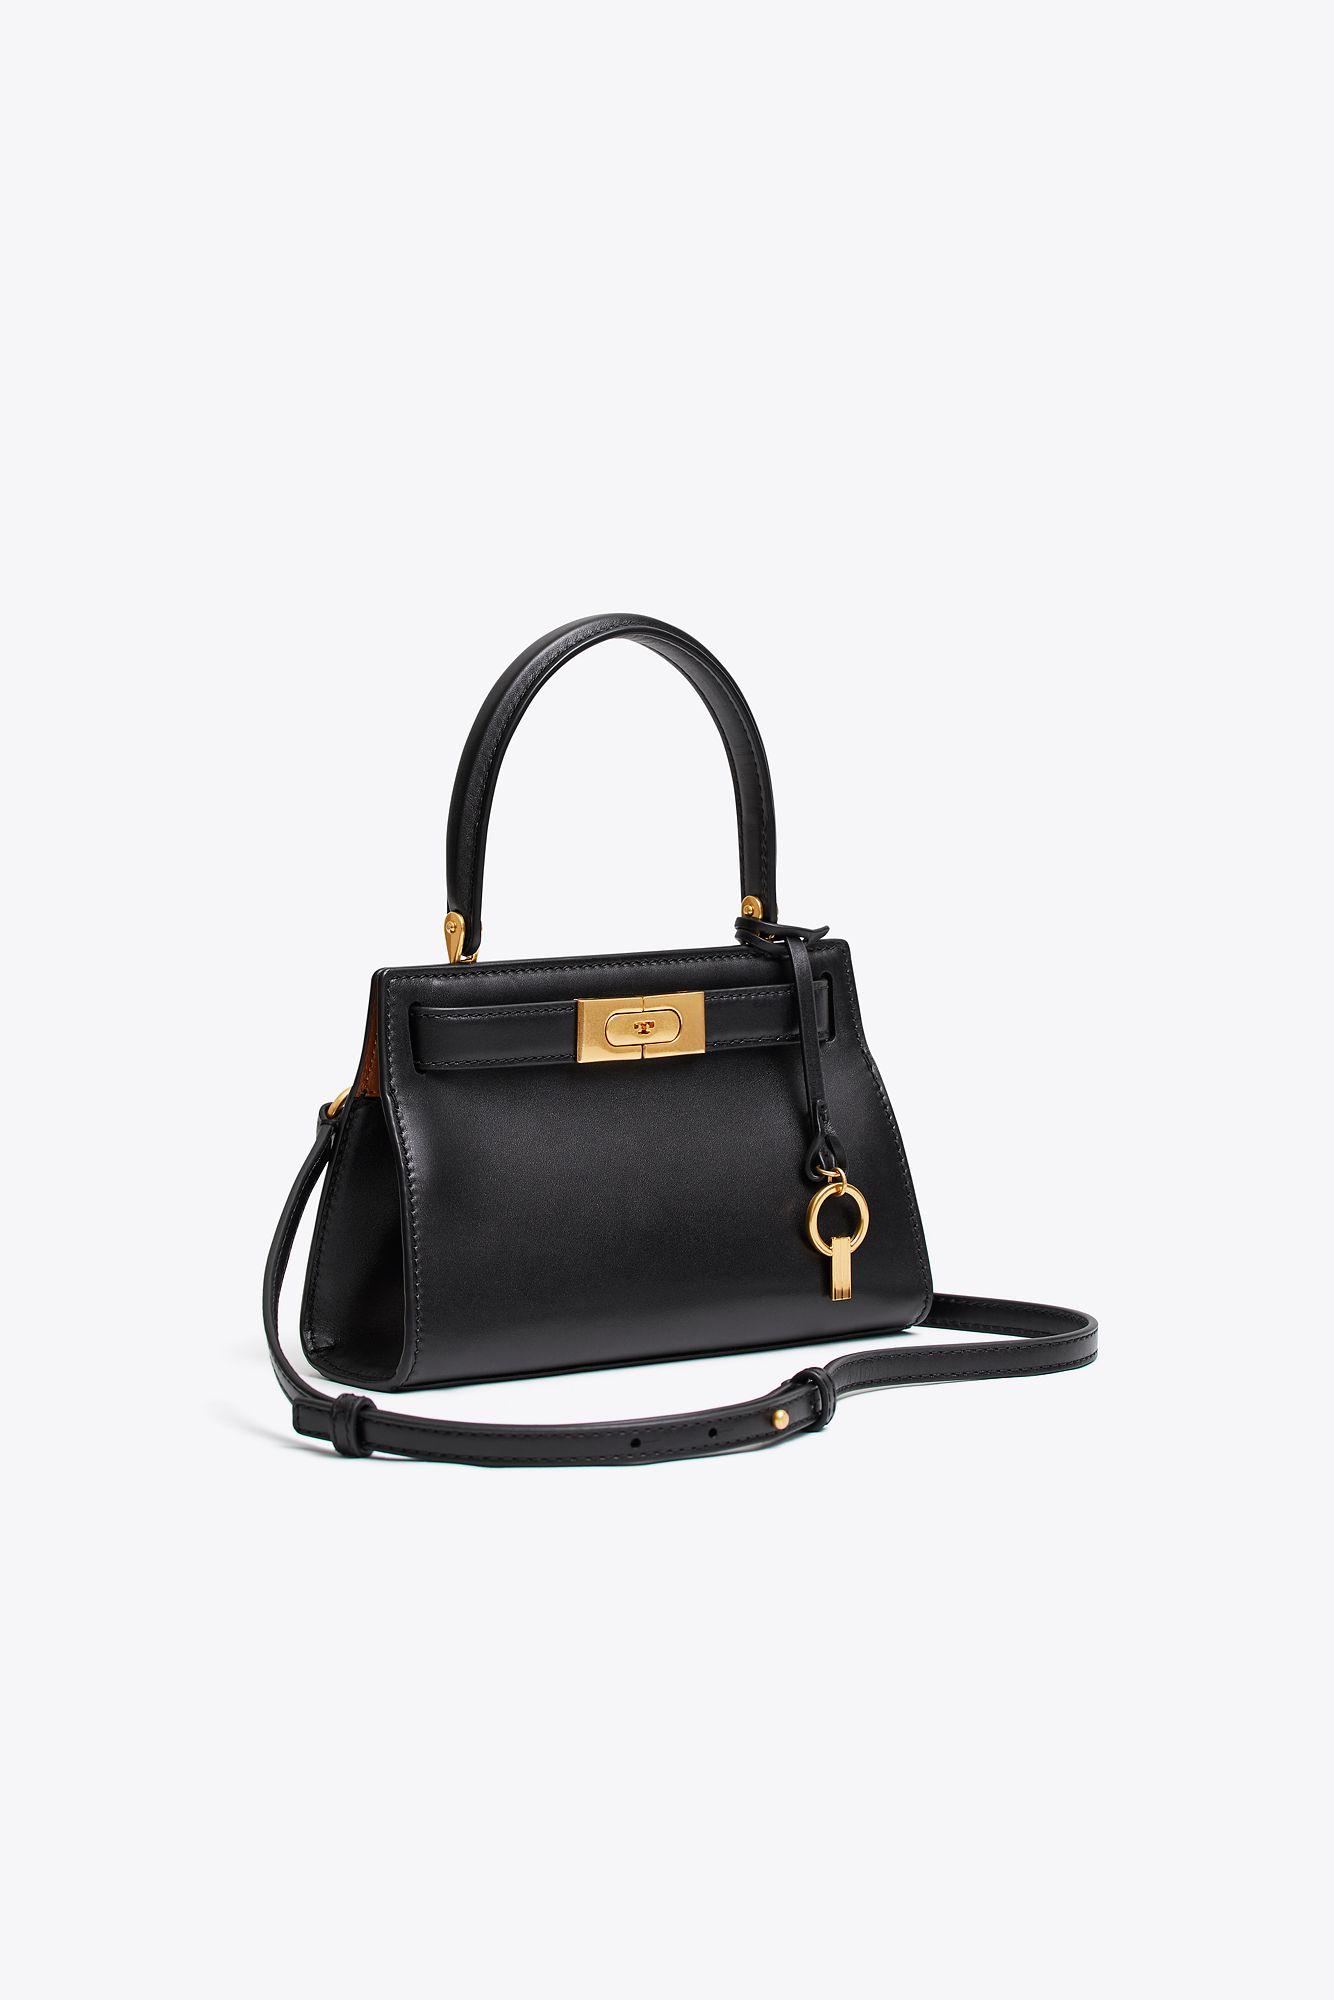 Tory Burch Leather Lee Radziwill Petite Bag in Black - Save 40% - Lyst